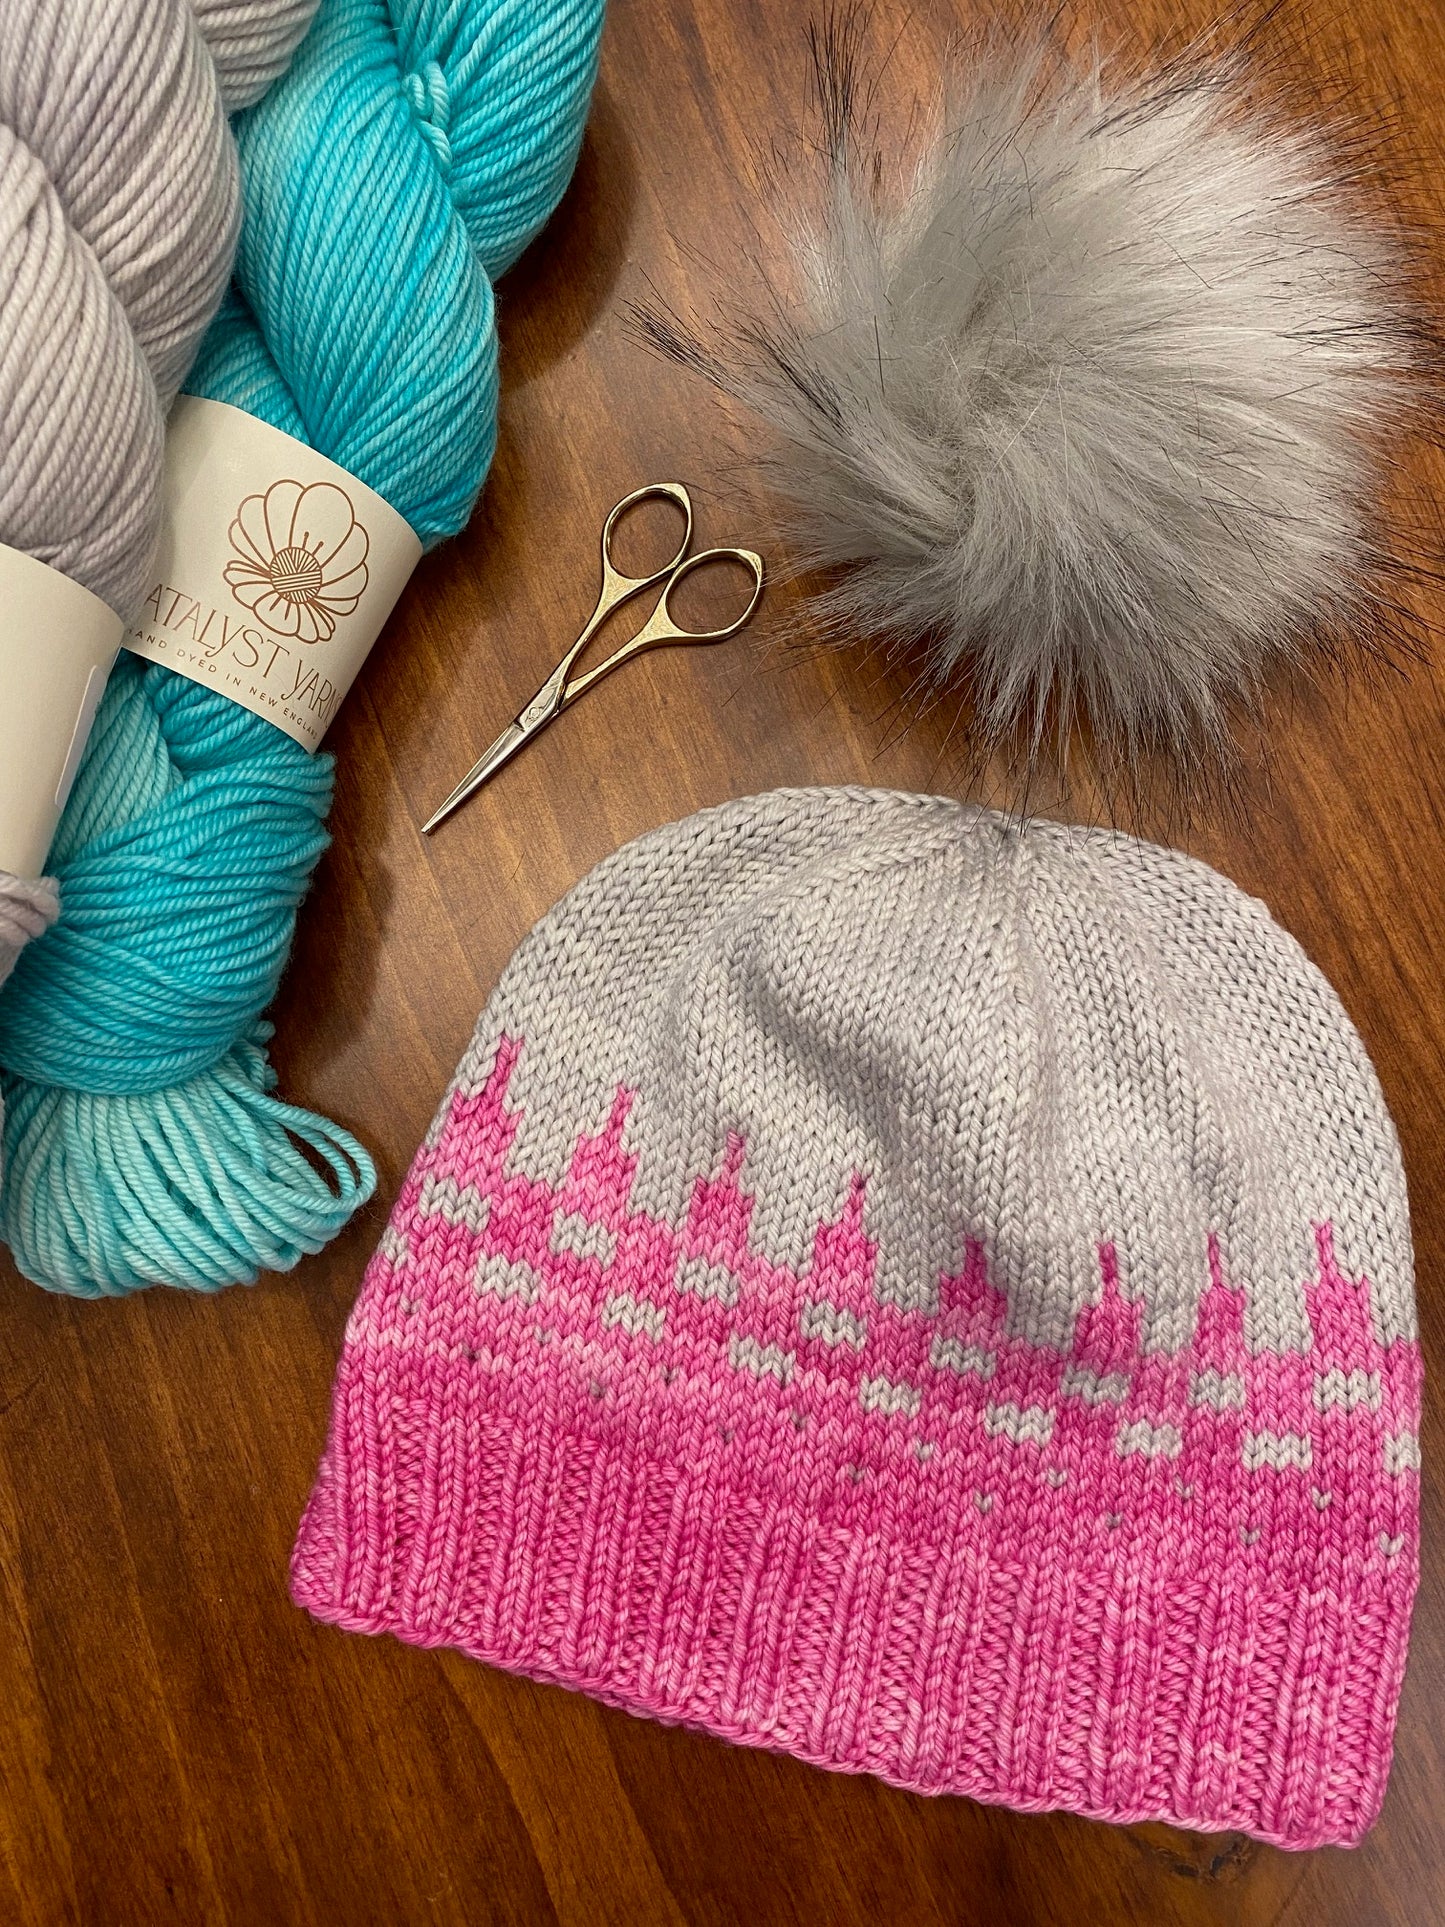 Colorwork Hat or Cowl: A Next Steps in Knitting Workshop